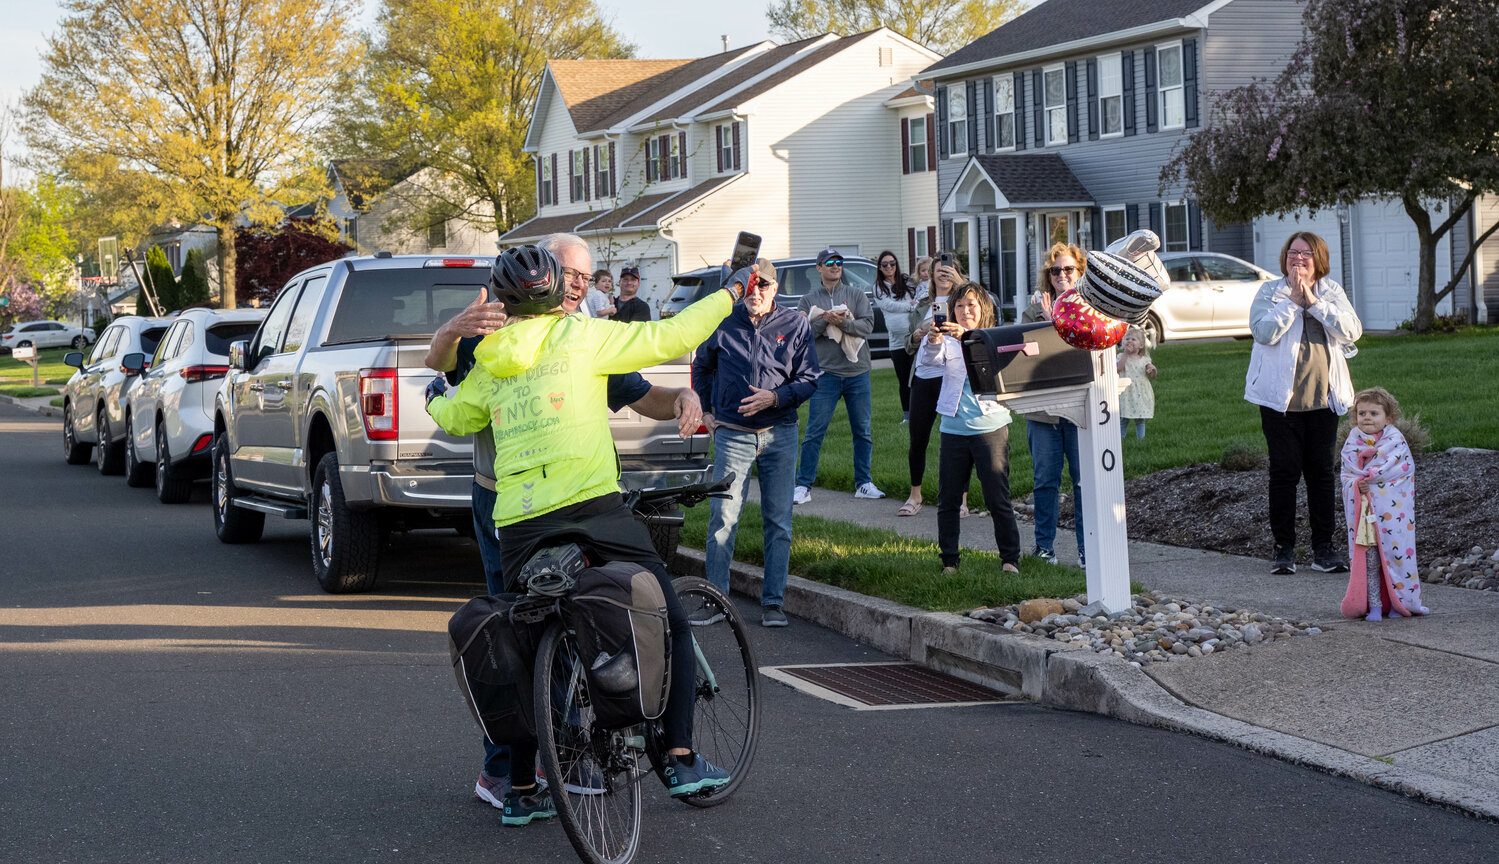 Wayne Tallman, of Falls, greets his sister Debbie Tallman Curtis as she arrives at his home. Curtis traveled across on her bike to raise awareness for mental health issues.